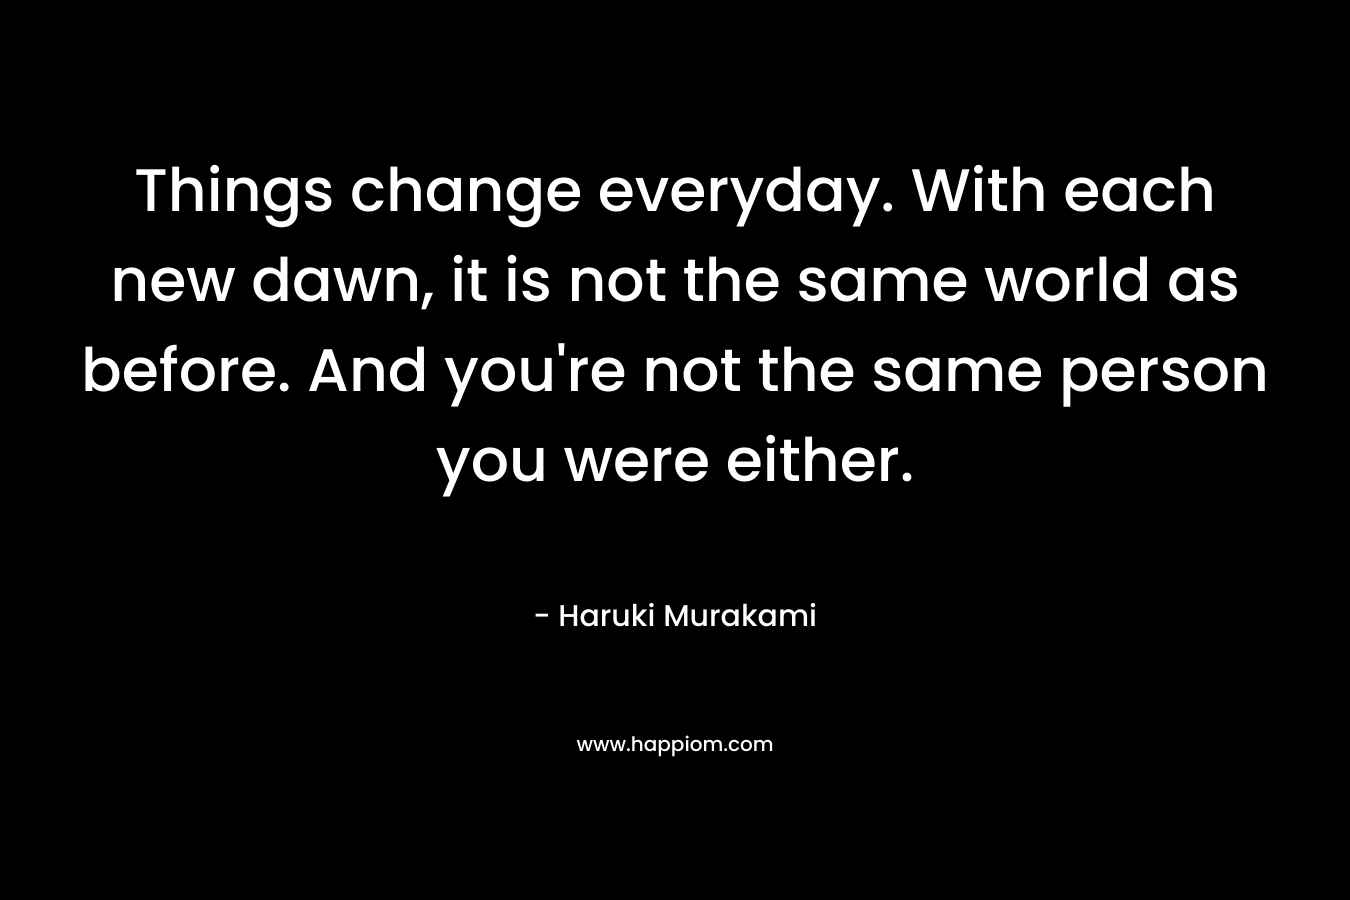 Things change everyday. With each new dawn, it is not the same world as before. And you're not the same person you were either.